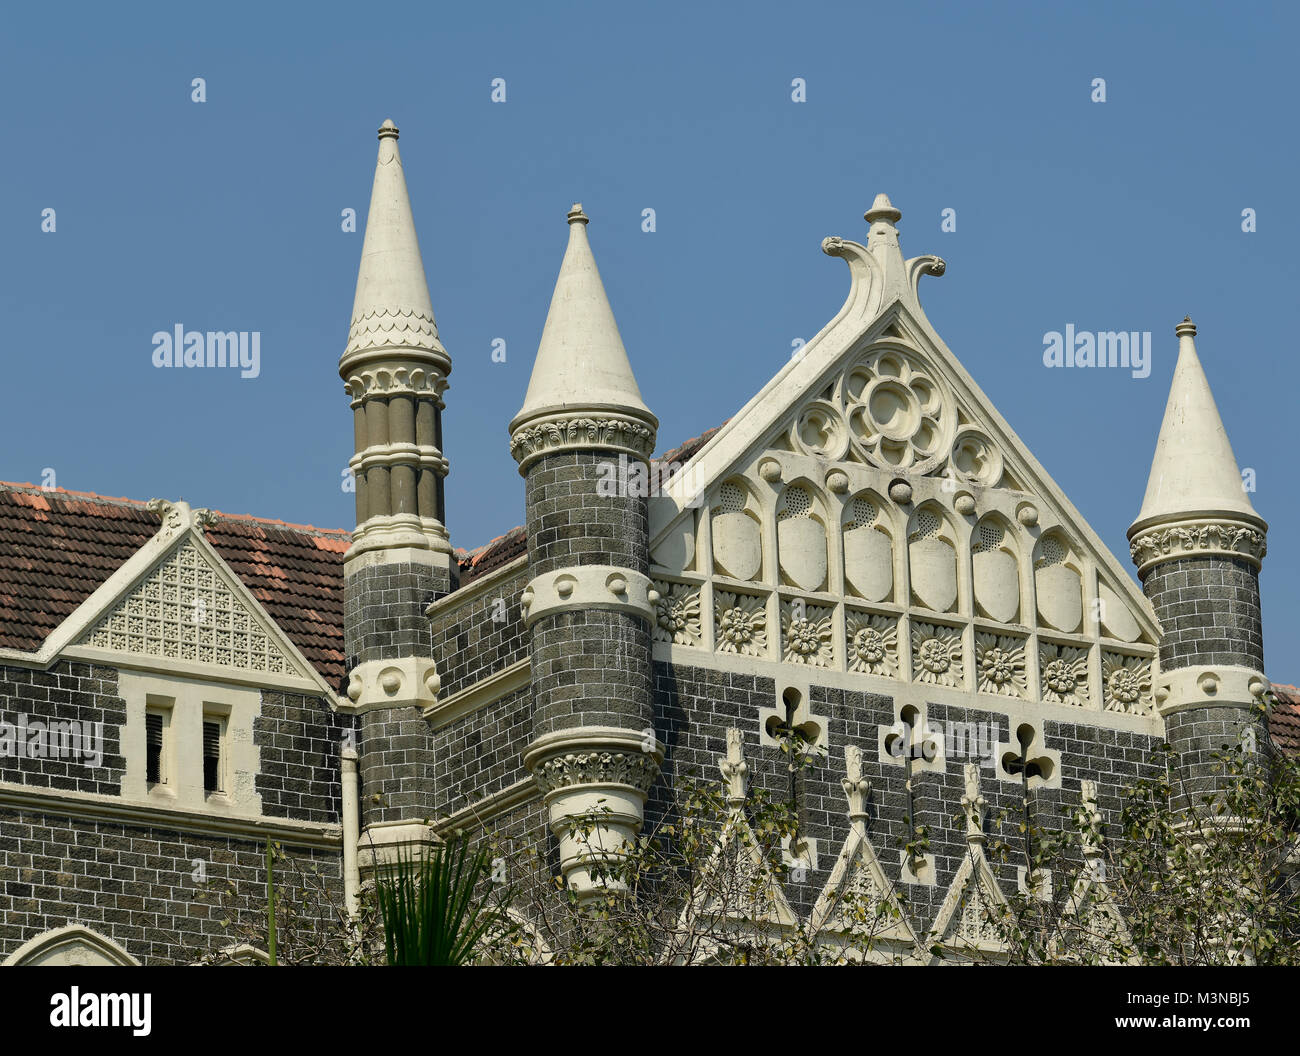 Architecture: Close up of a Building with Arched Windows ,Roof Tiles and Stone Masonry Near Mumbai,India Stock Photo